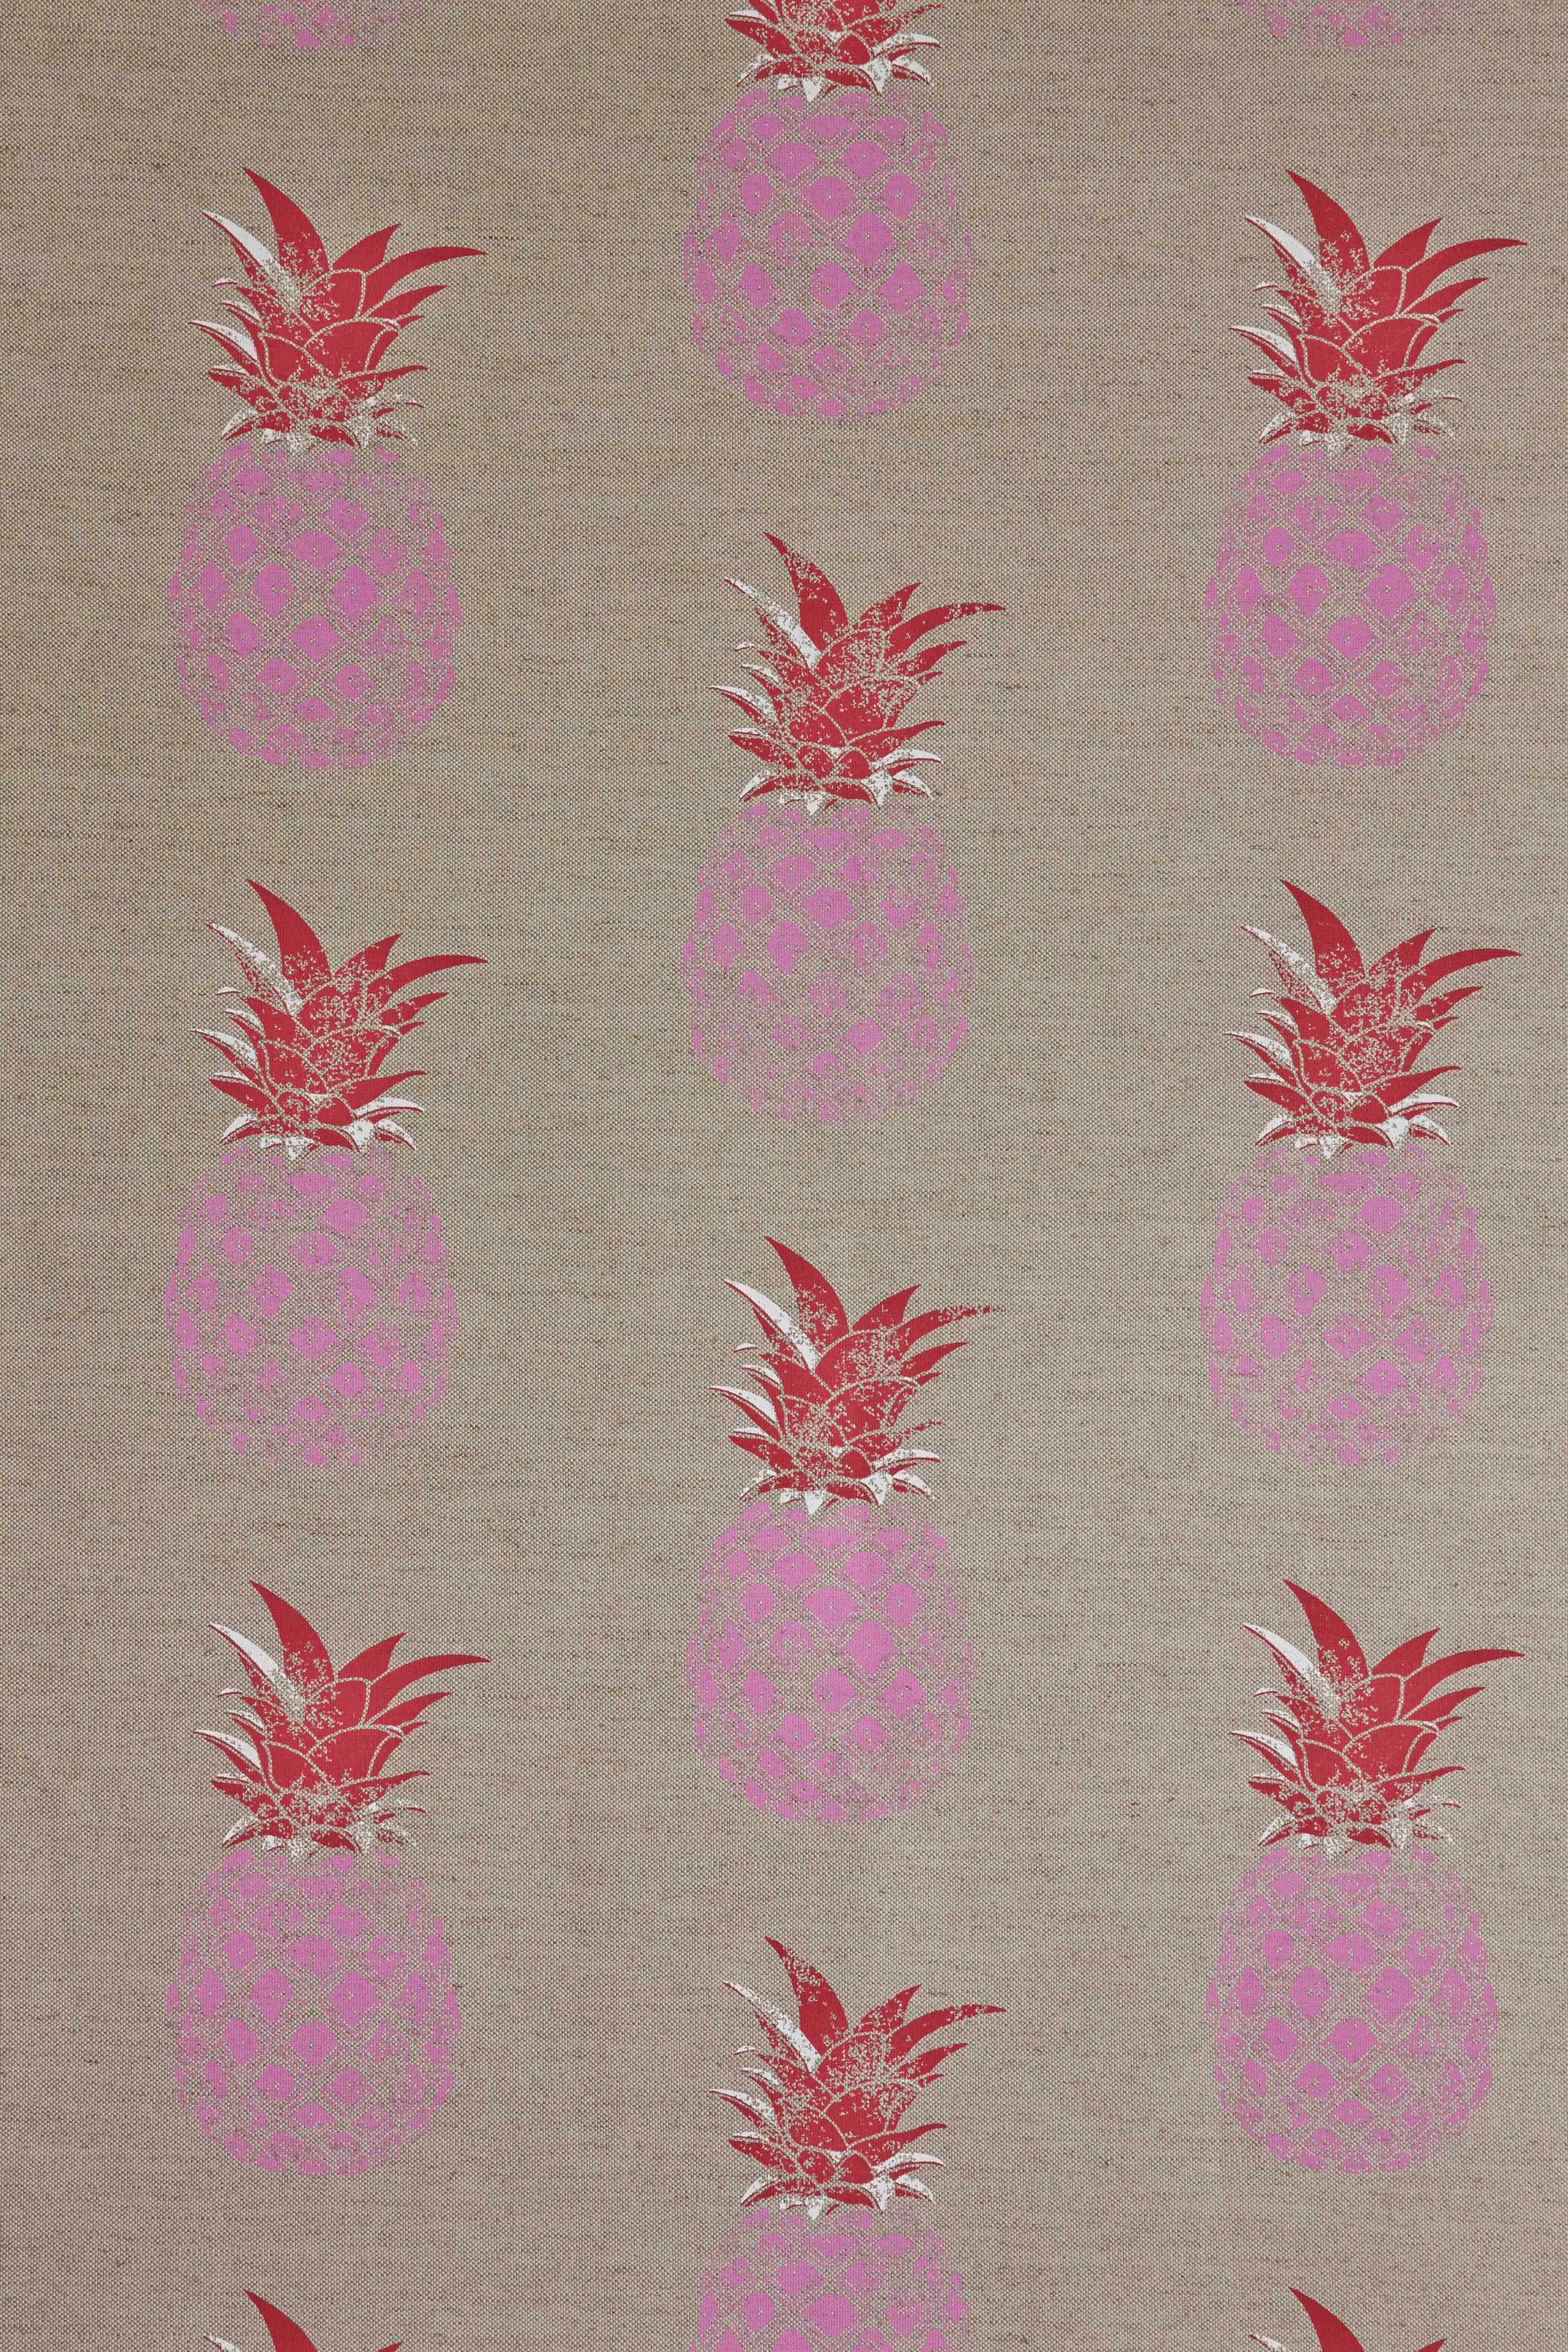 'Pineapple' Contemporary, Traditional Fabric in Pink/Red on Cream For Sale 1